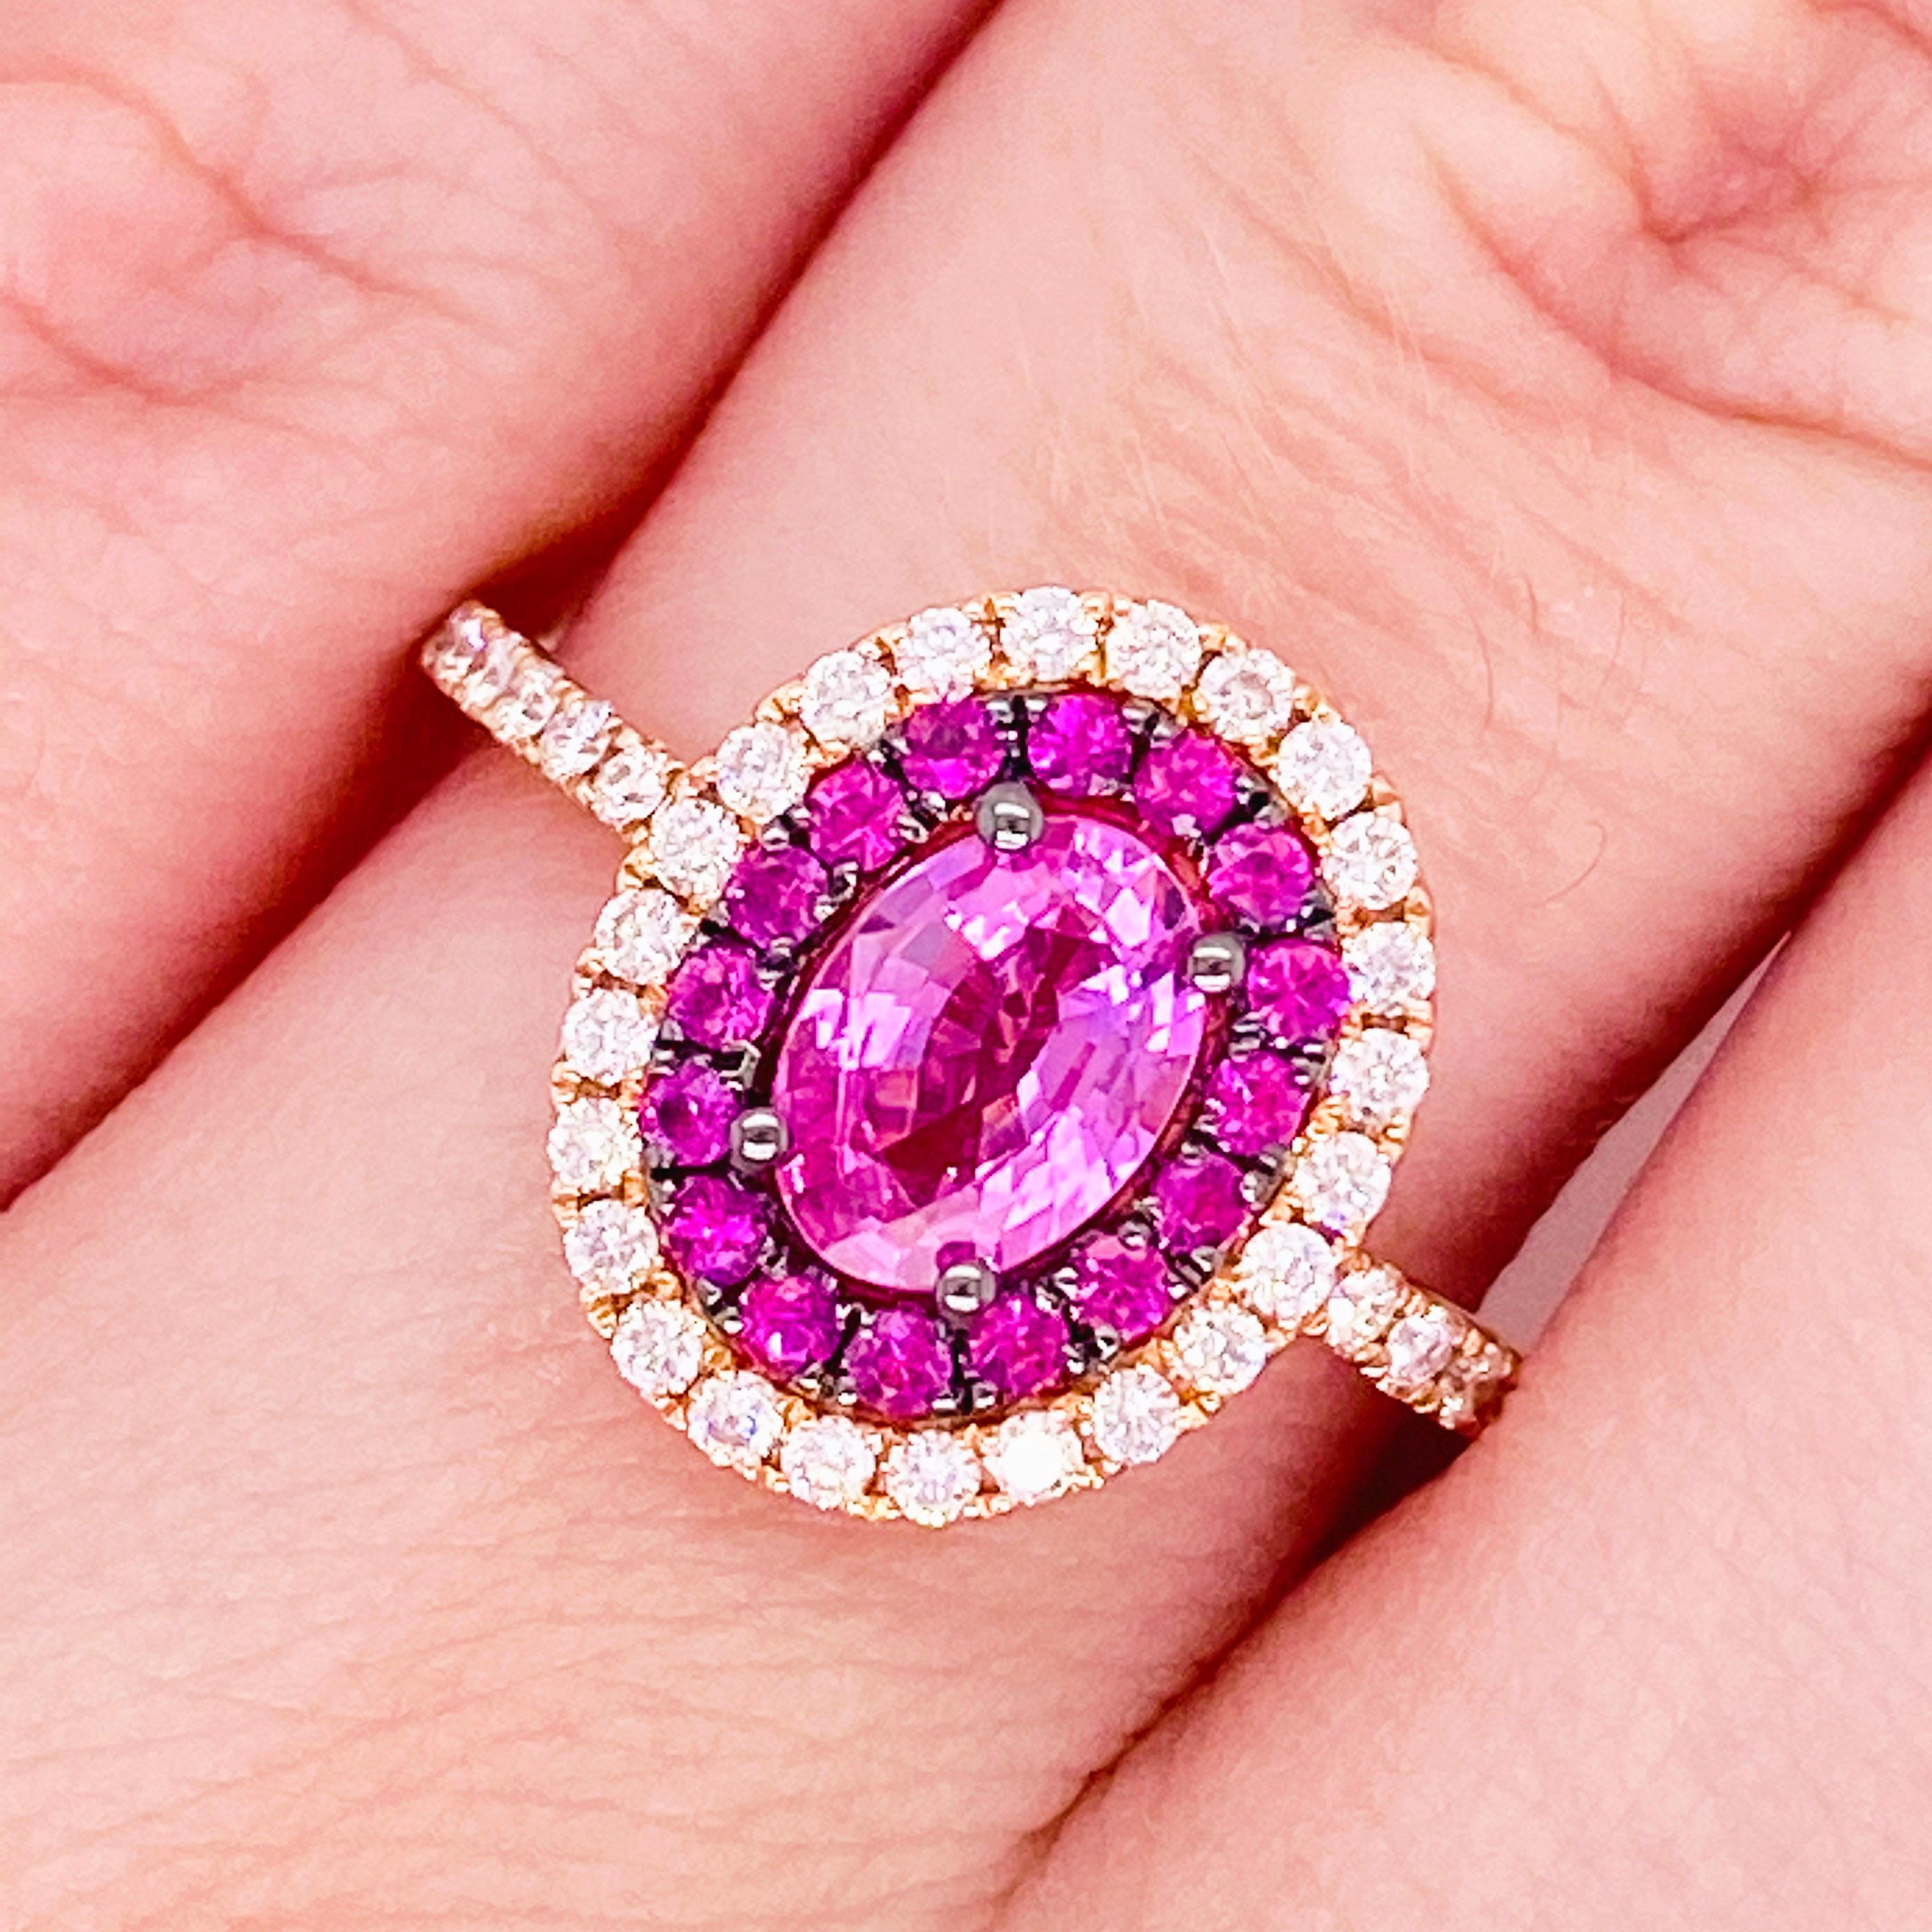 This stunningly beautiful bright pink sapphire surrounded by smaller brilliant sapphires and dripping with diamonds set in polished 14k Rose Gold provides a look that is very modern and classic at the same time! This ring is very fashionable and can